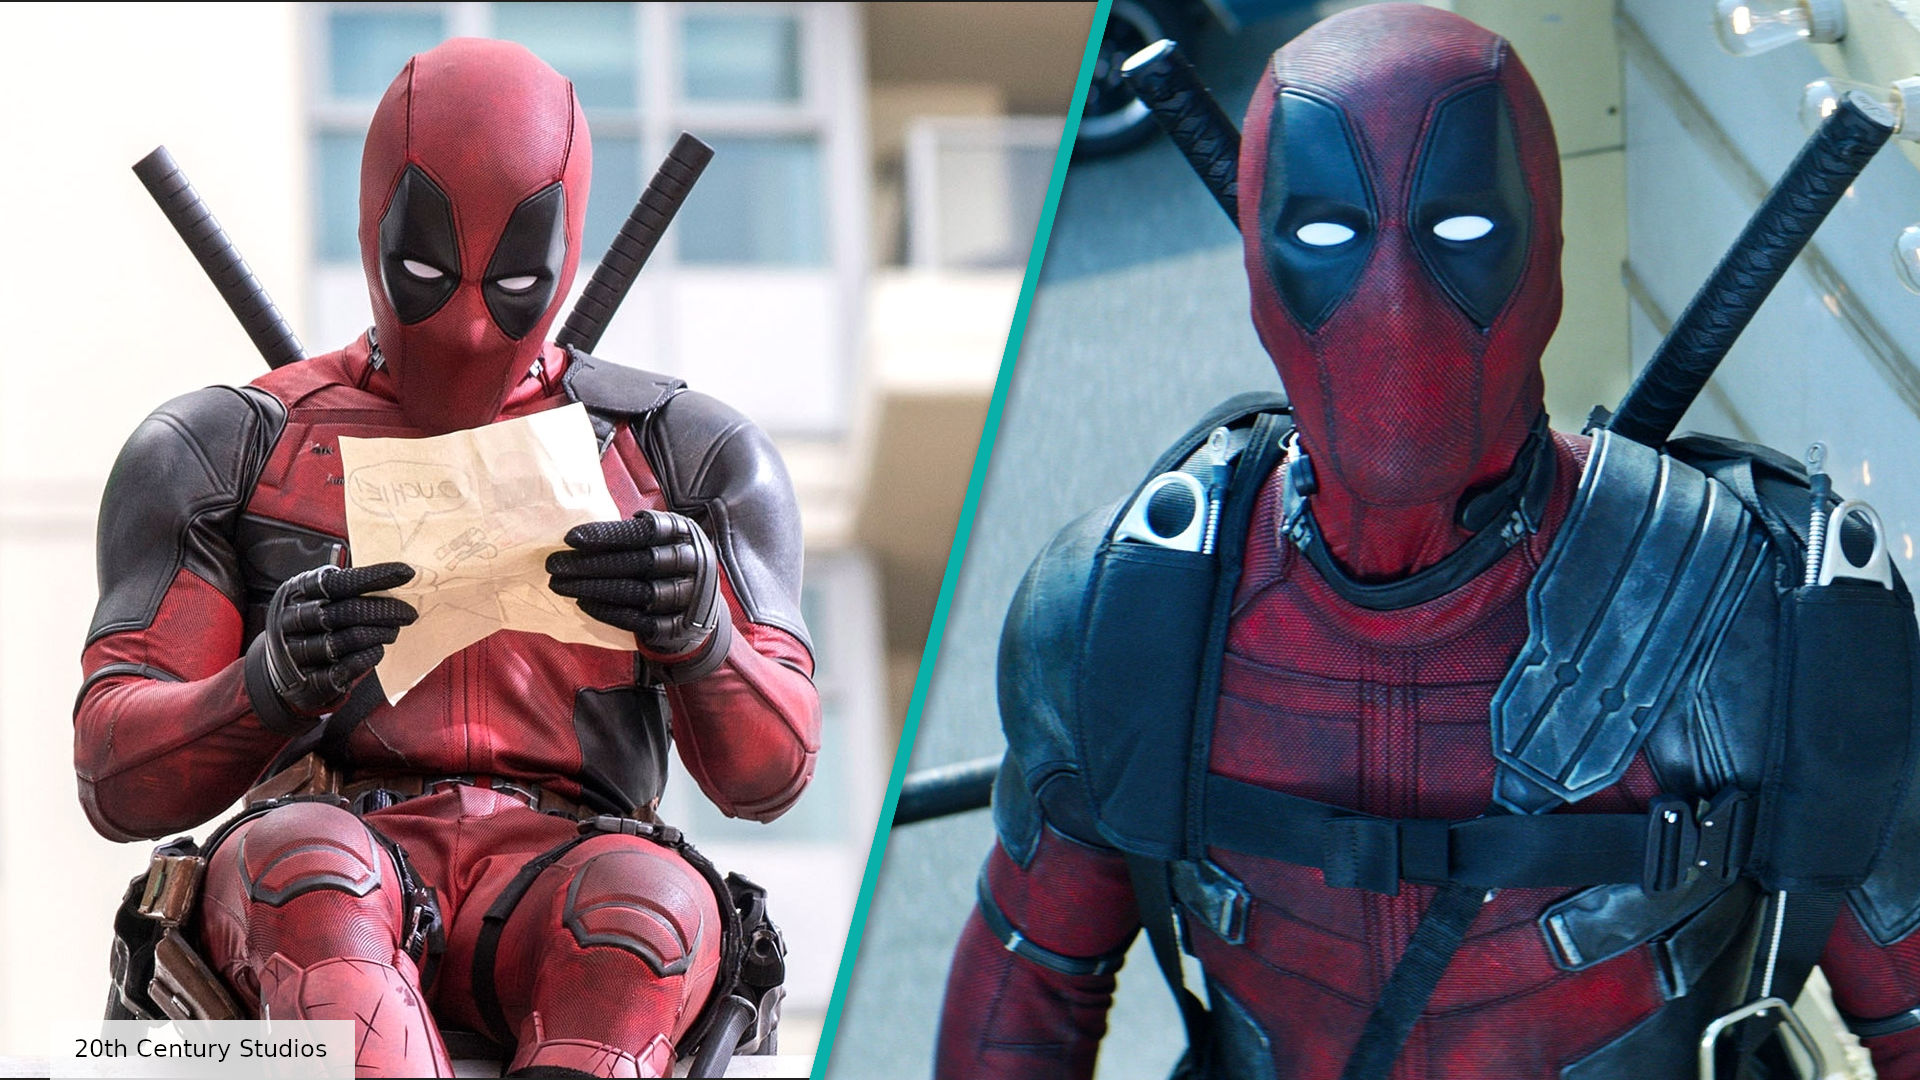 Deadpool 3 updates coming “sooner rather than later”, says Ryan Reynolds